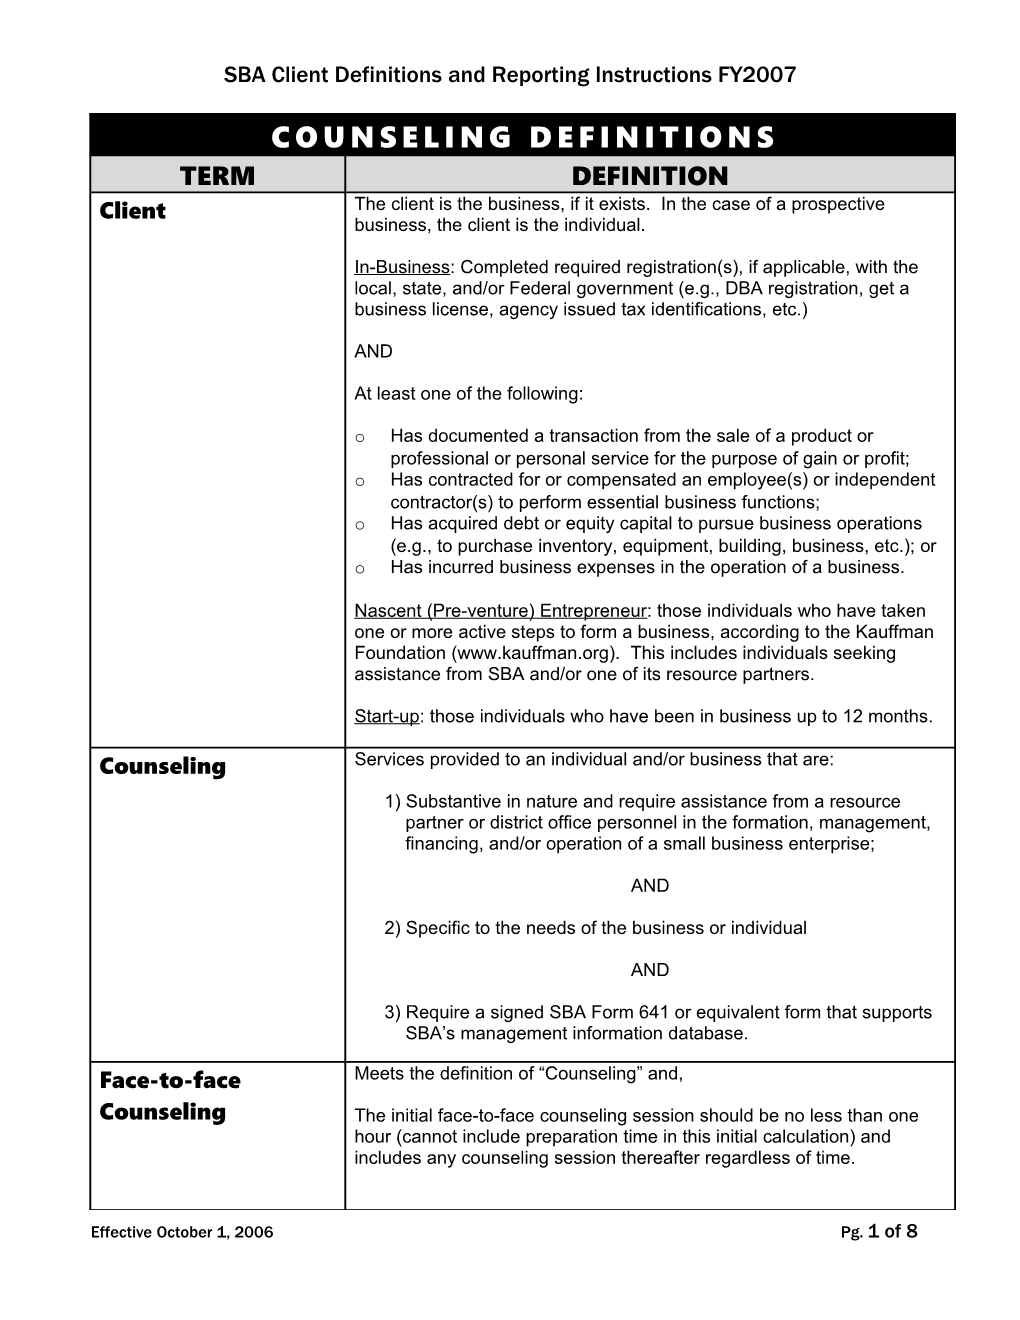 SBA Client Definitions and Reporting Instructions FY2007